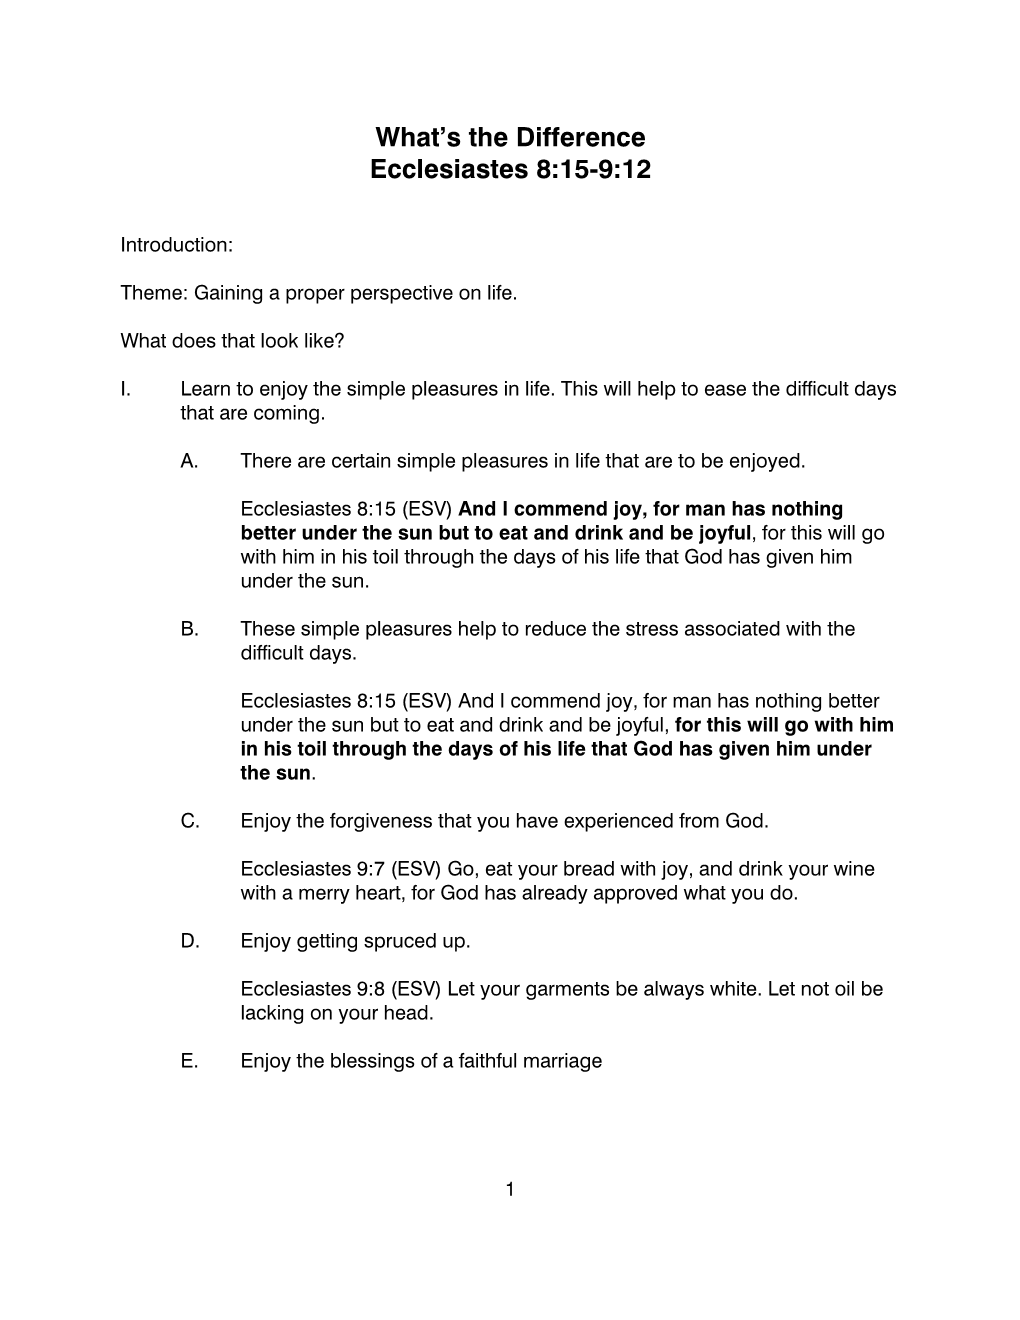 What's the Difference Ecclesiastes 8:15-9:12